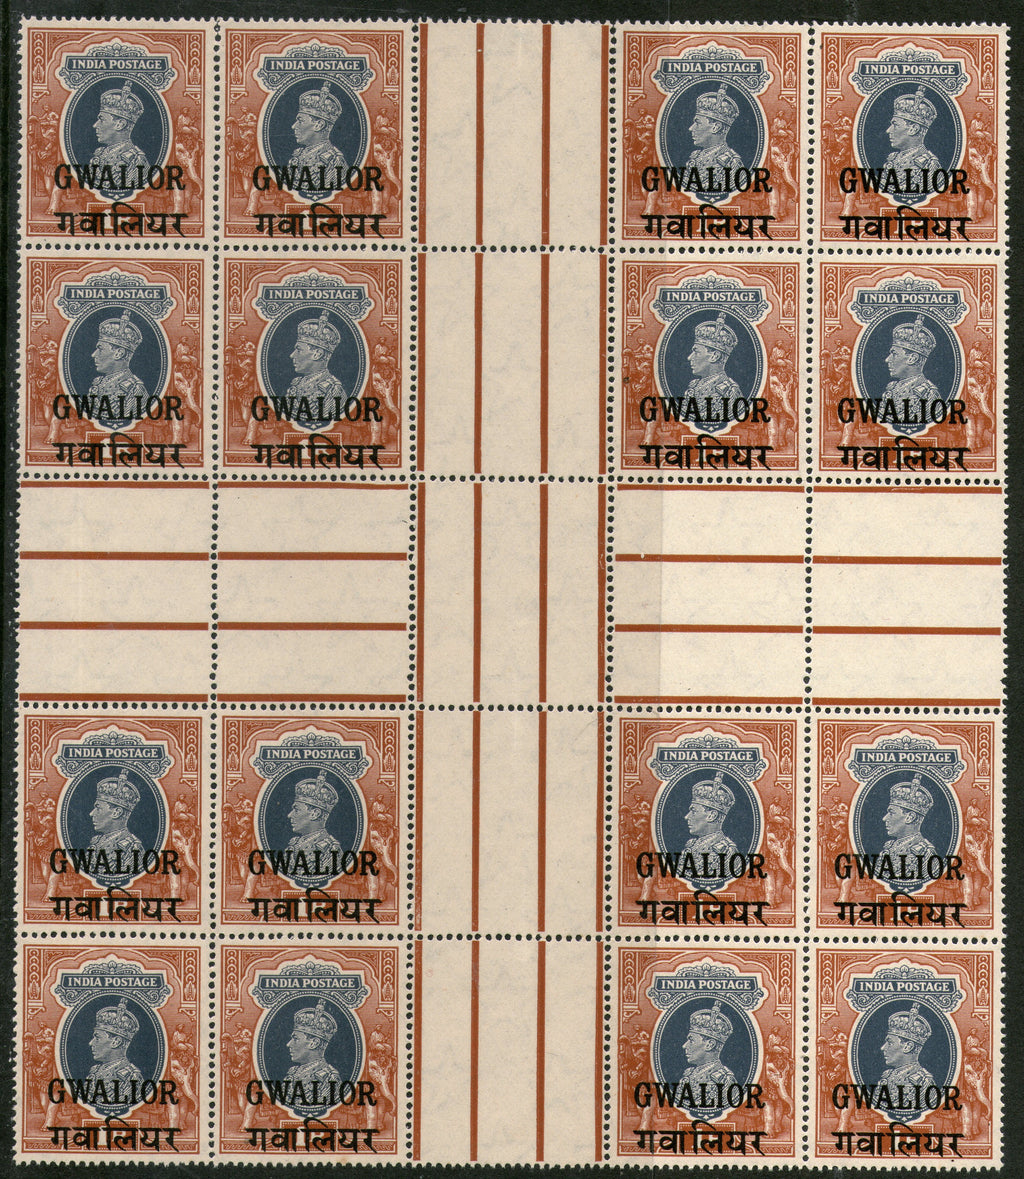 India Gwalior State 1R Postage KG VI SG 112 / Sc 112 Cross Gutter BLK/4 MNH £208 - Phil India Stamps